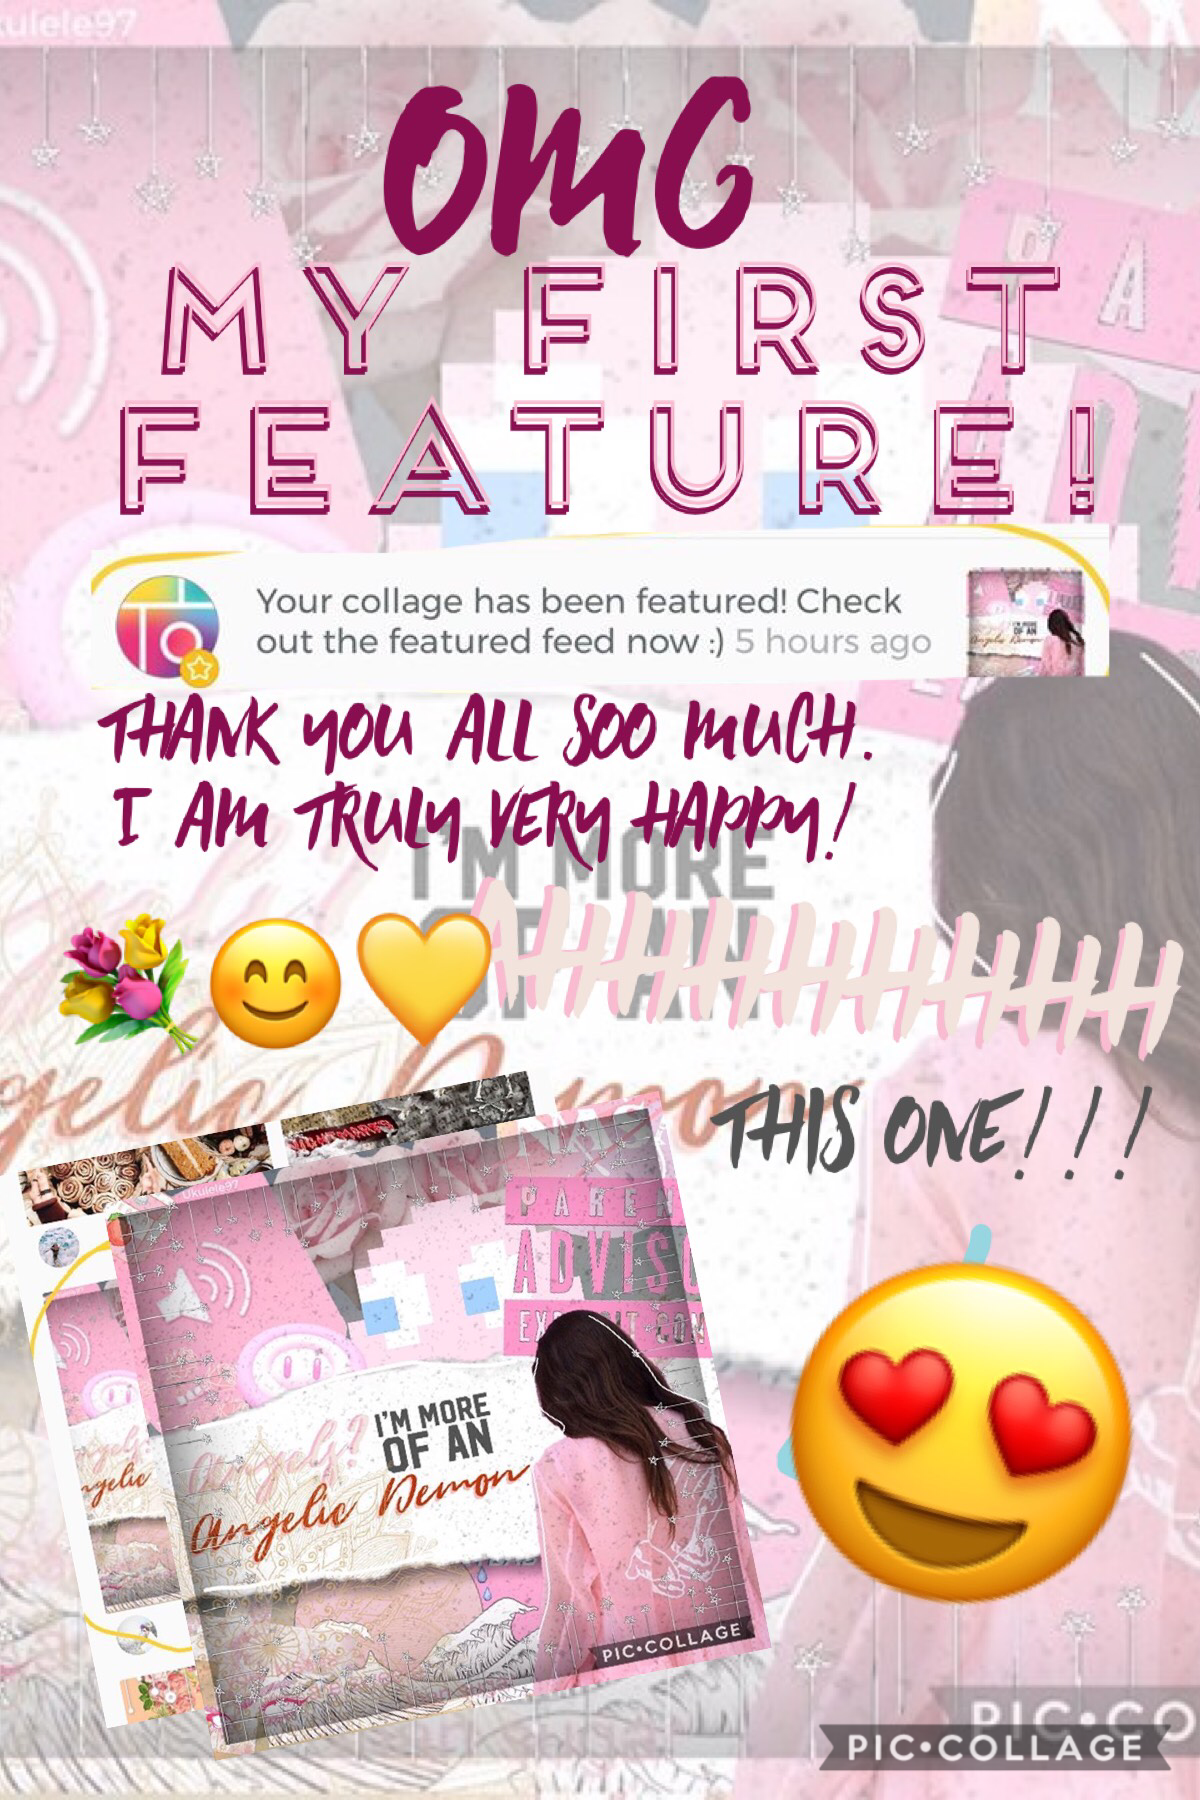 T A P P Y 💐 😊 💛

Omg My FIRST FEATURE!!!! 😆😆😆 Thx y’all it means a lot!!! I started PicCollage in July 2018 and look where I am now!! Sure I’m not as far as the other people but yay!!!!!💐😊💛❤️ love chili vibes